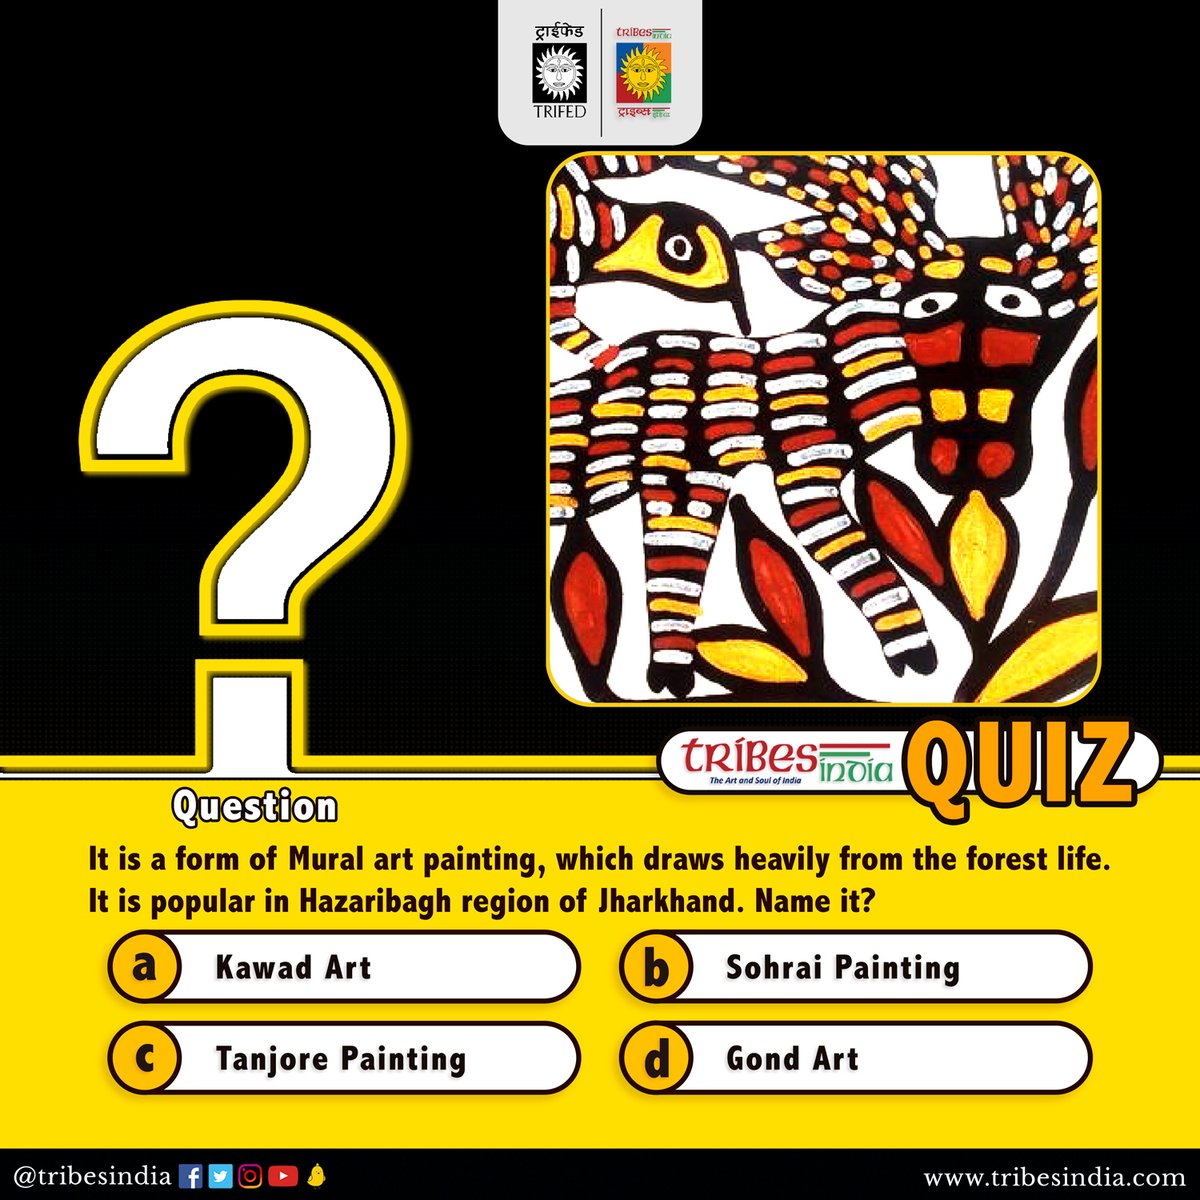 It is a form of Mural art painting, which draws heavily from the forest life. It is popular in Hazaribagh region of Jharkhand.

Name it? 
a)Kawad Art
b)Sohrai Painting
c)Tanjore Painting
d)Gond Art

Please respond with the correct option👇.    

#Vocal4Local #BuyTribal #QuizTime